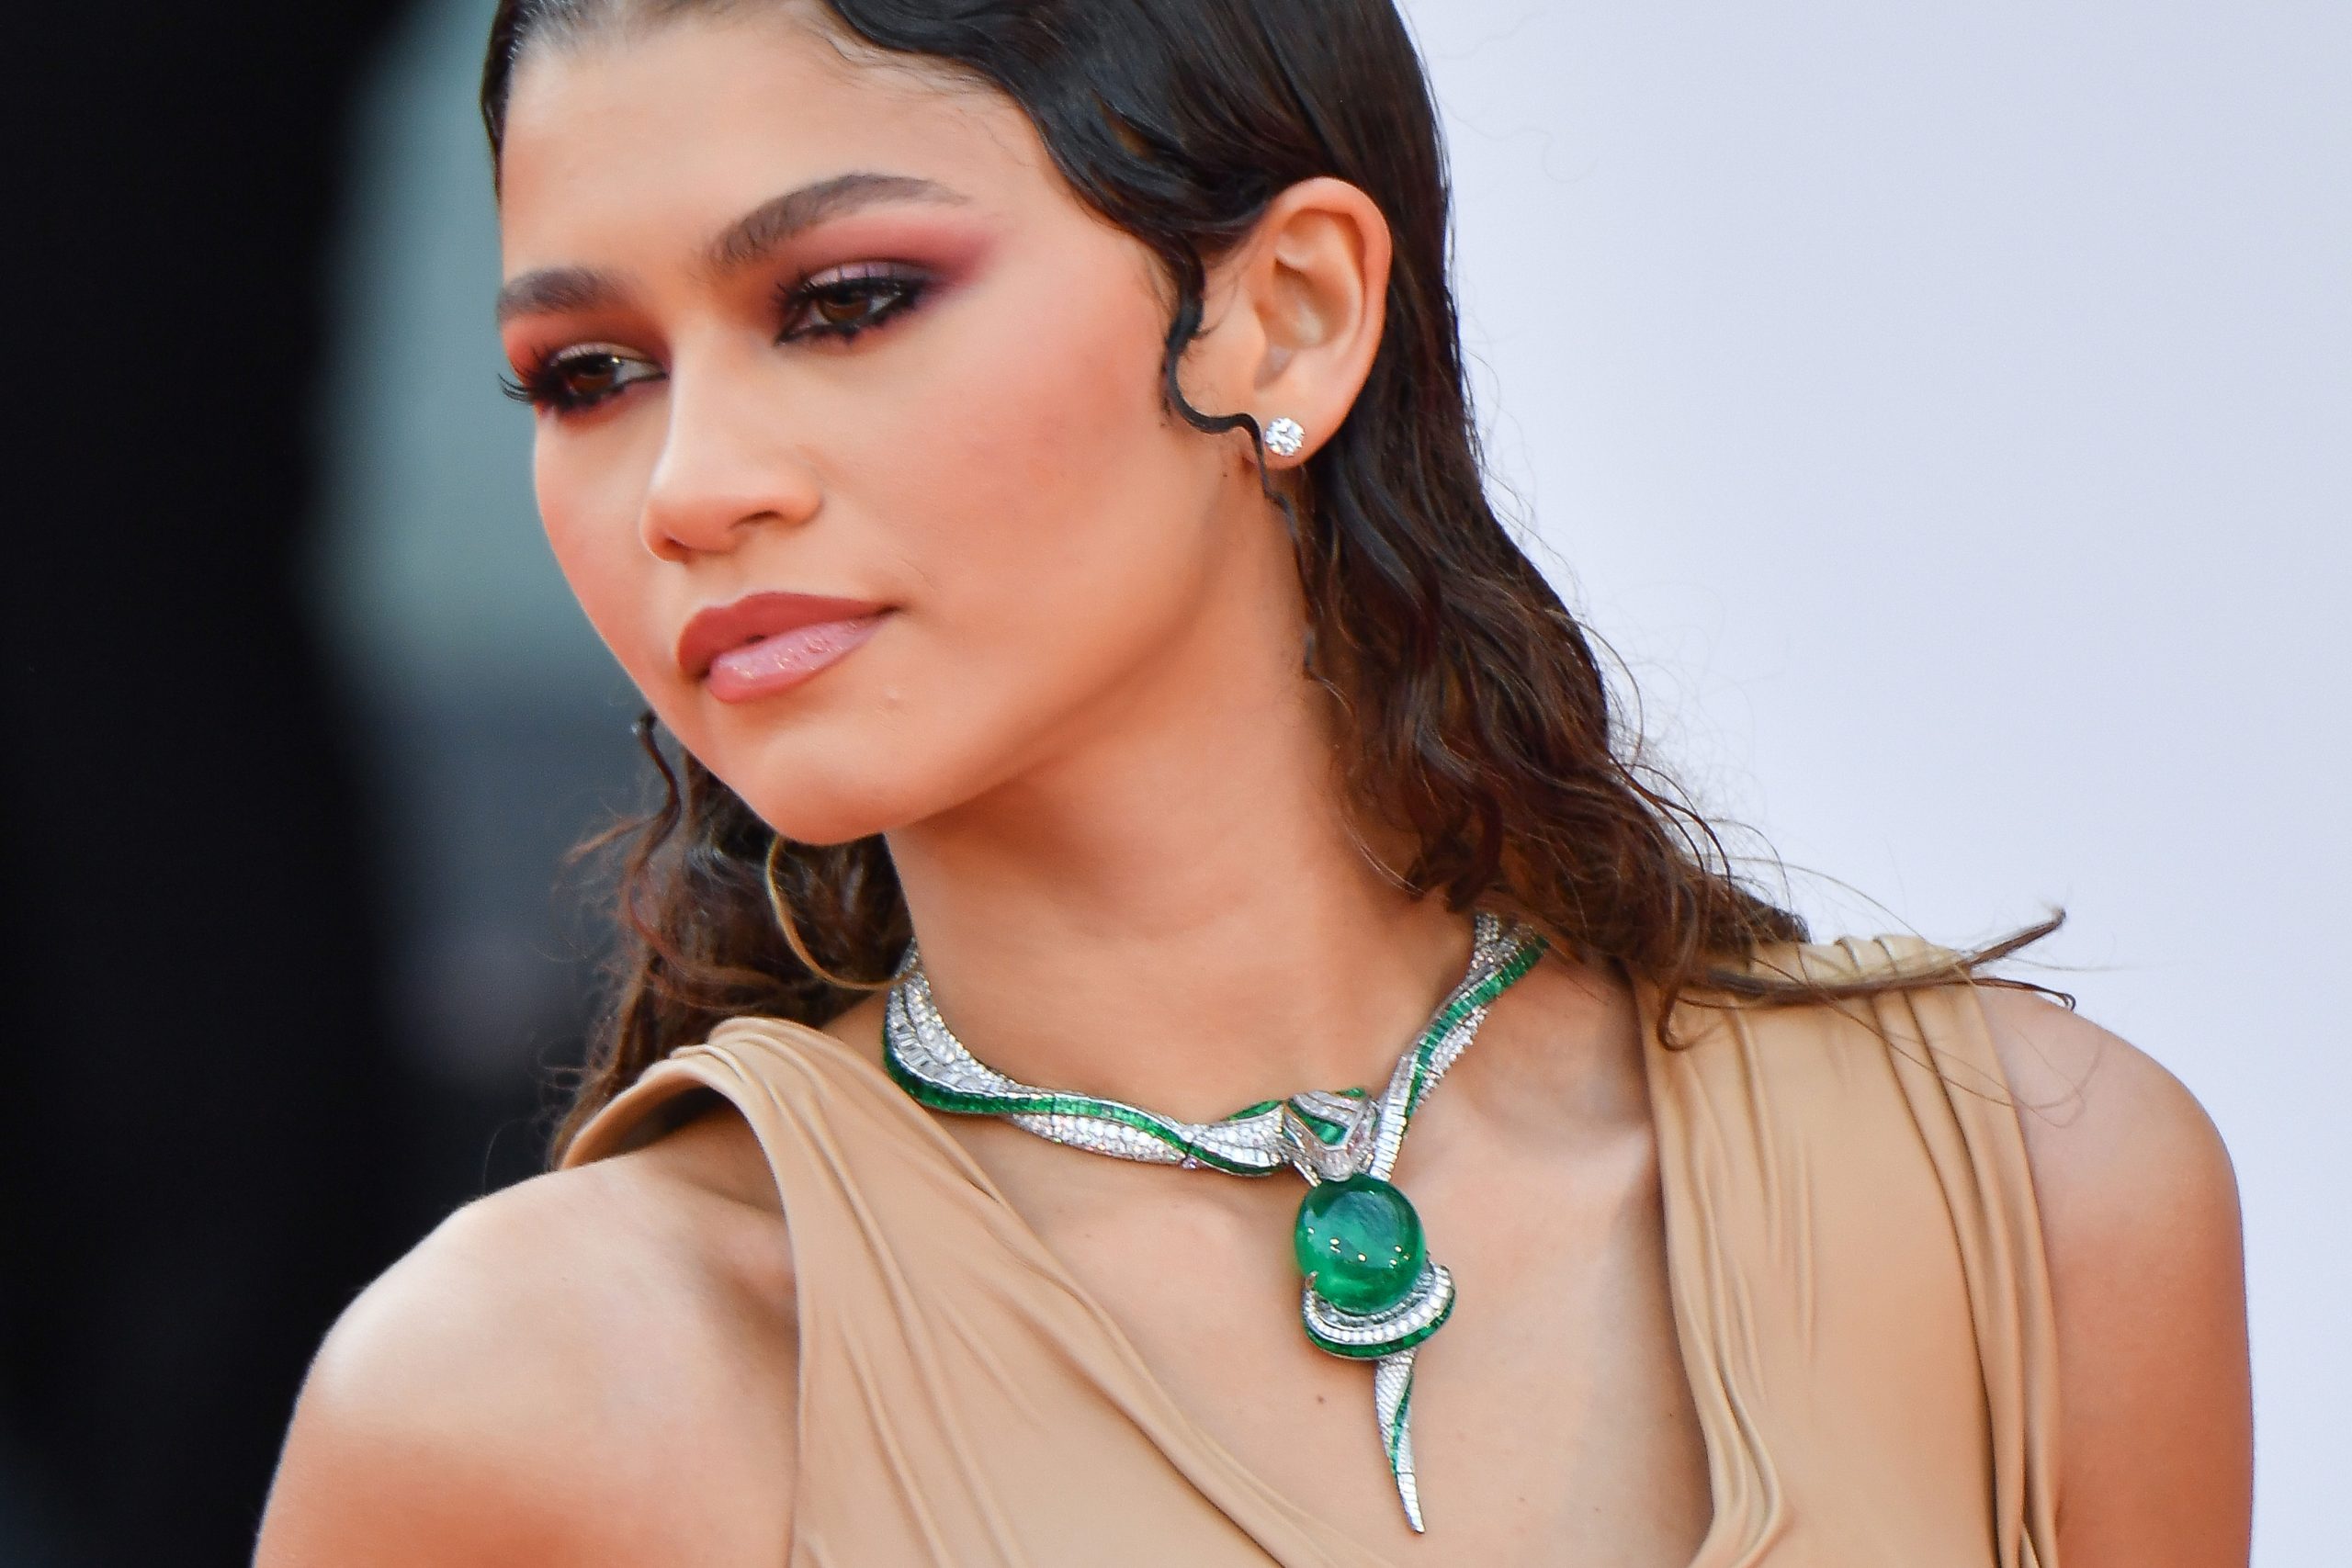 Behold the 93 carat Bvlgari necklace Zendaya wore to the Venice Film  Festival